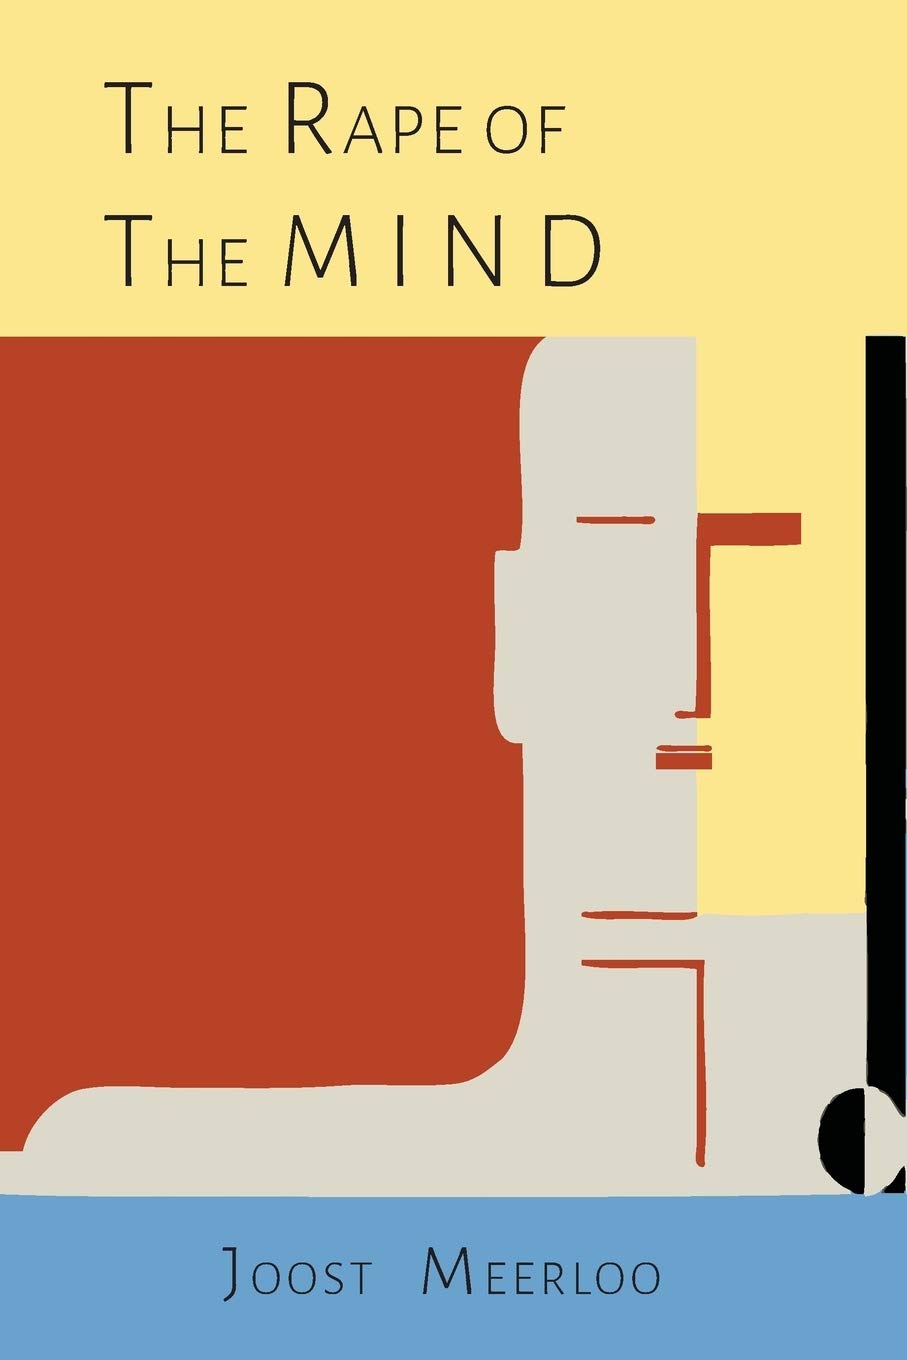 The Rape of the Mind: The Psychology of Thought Control, Menticide, and Brainwashing